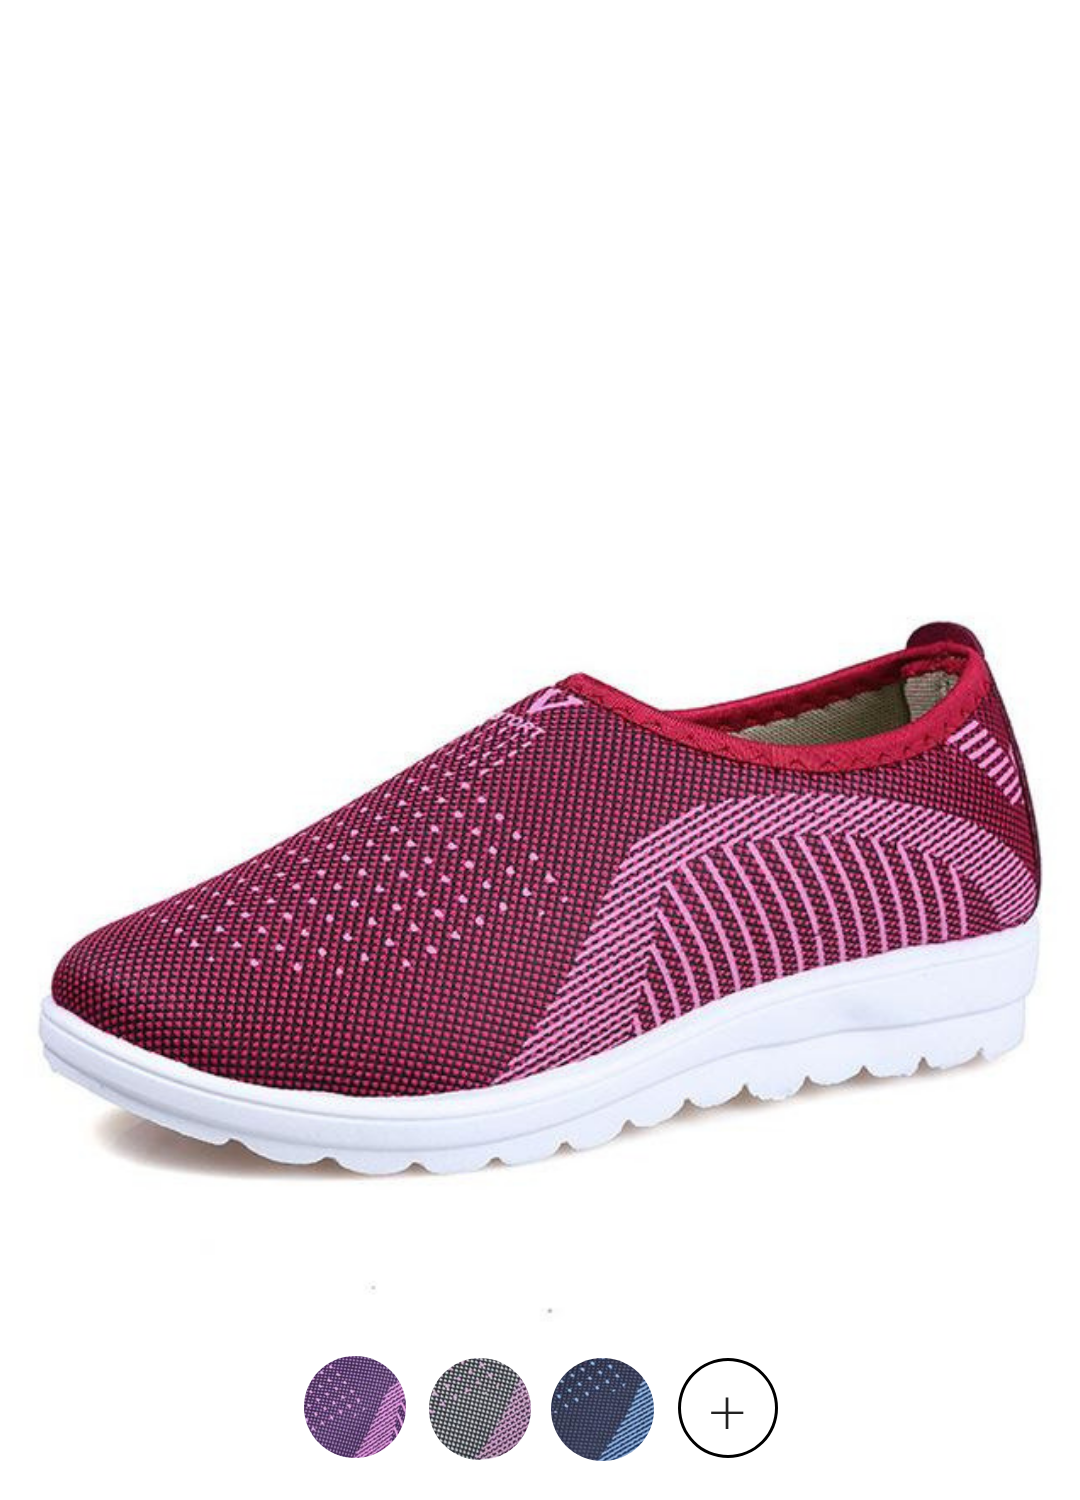 Cloud Sox Women's Loafer Shoes | Ultrasellershoes.com – Ultra Seller Shoes